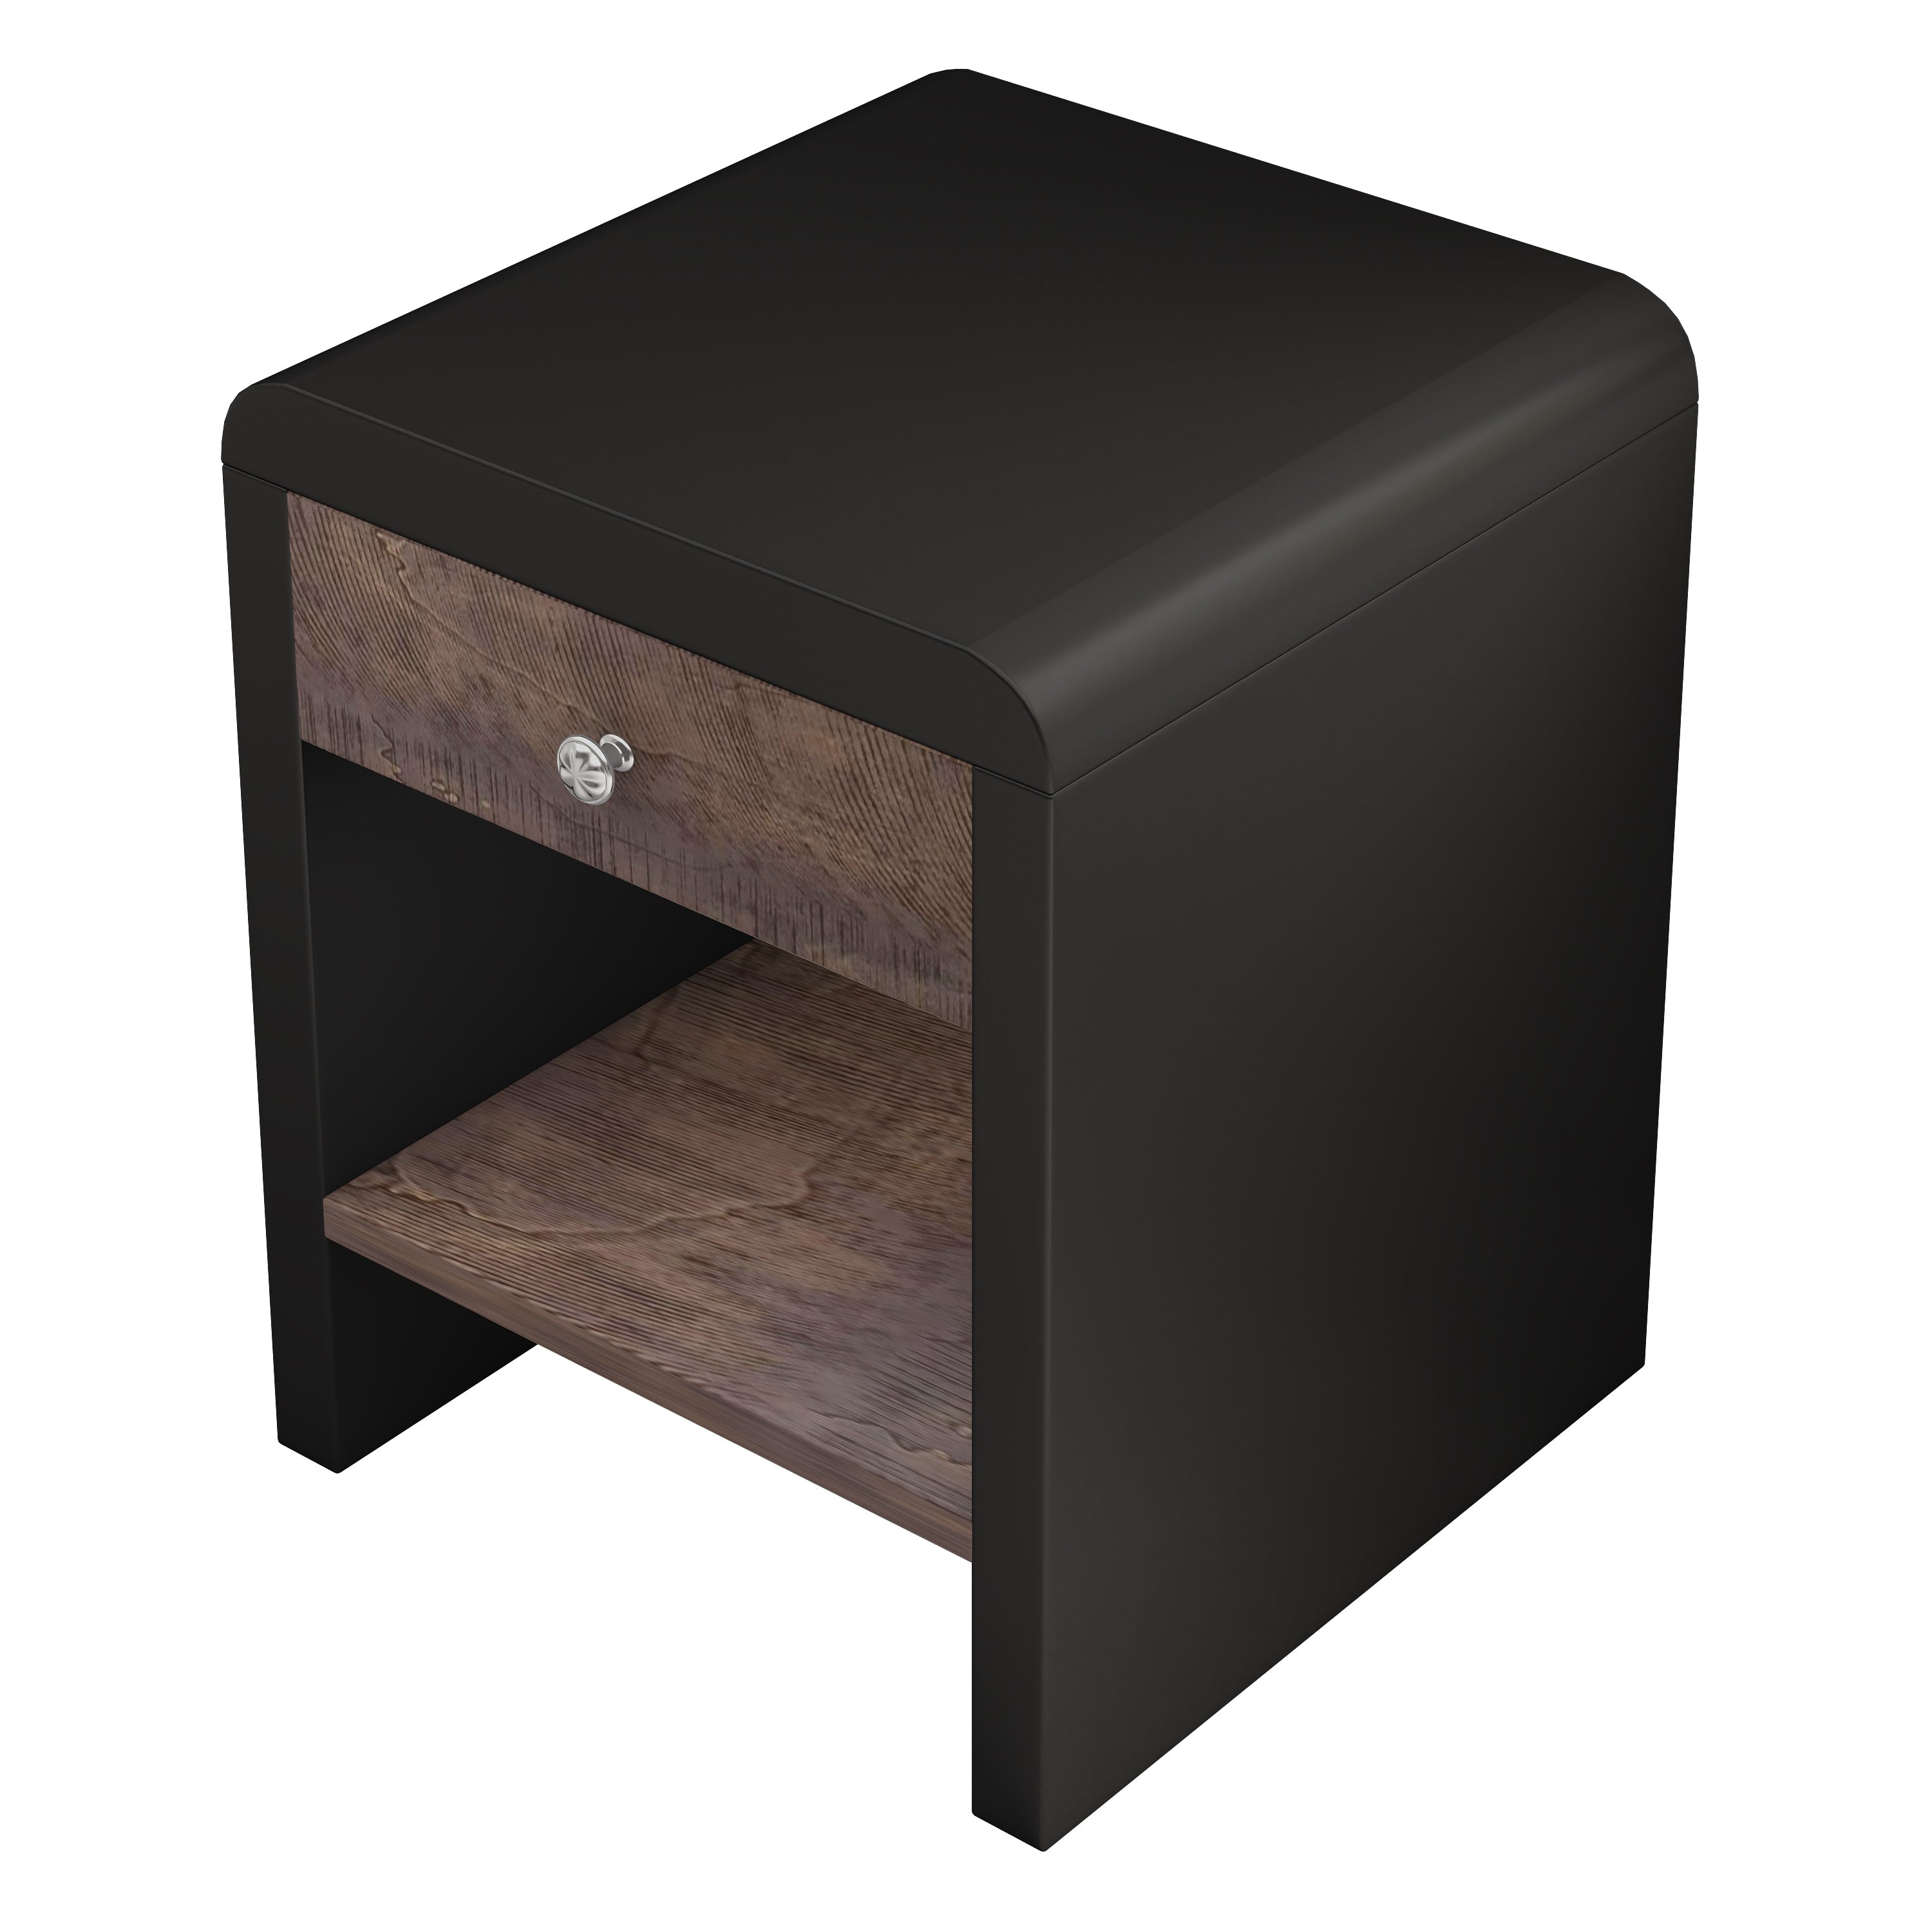 1-Drawer MDF Nightstand in Walnut and Black